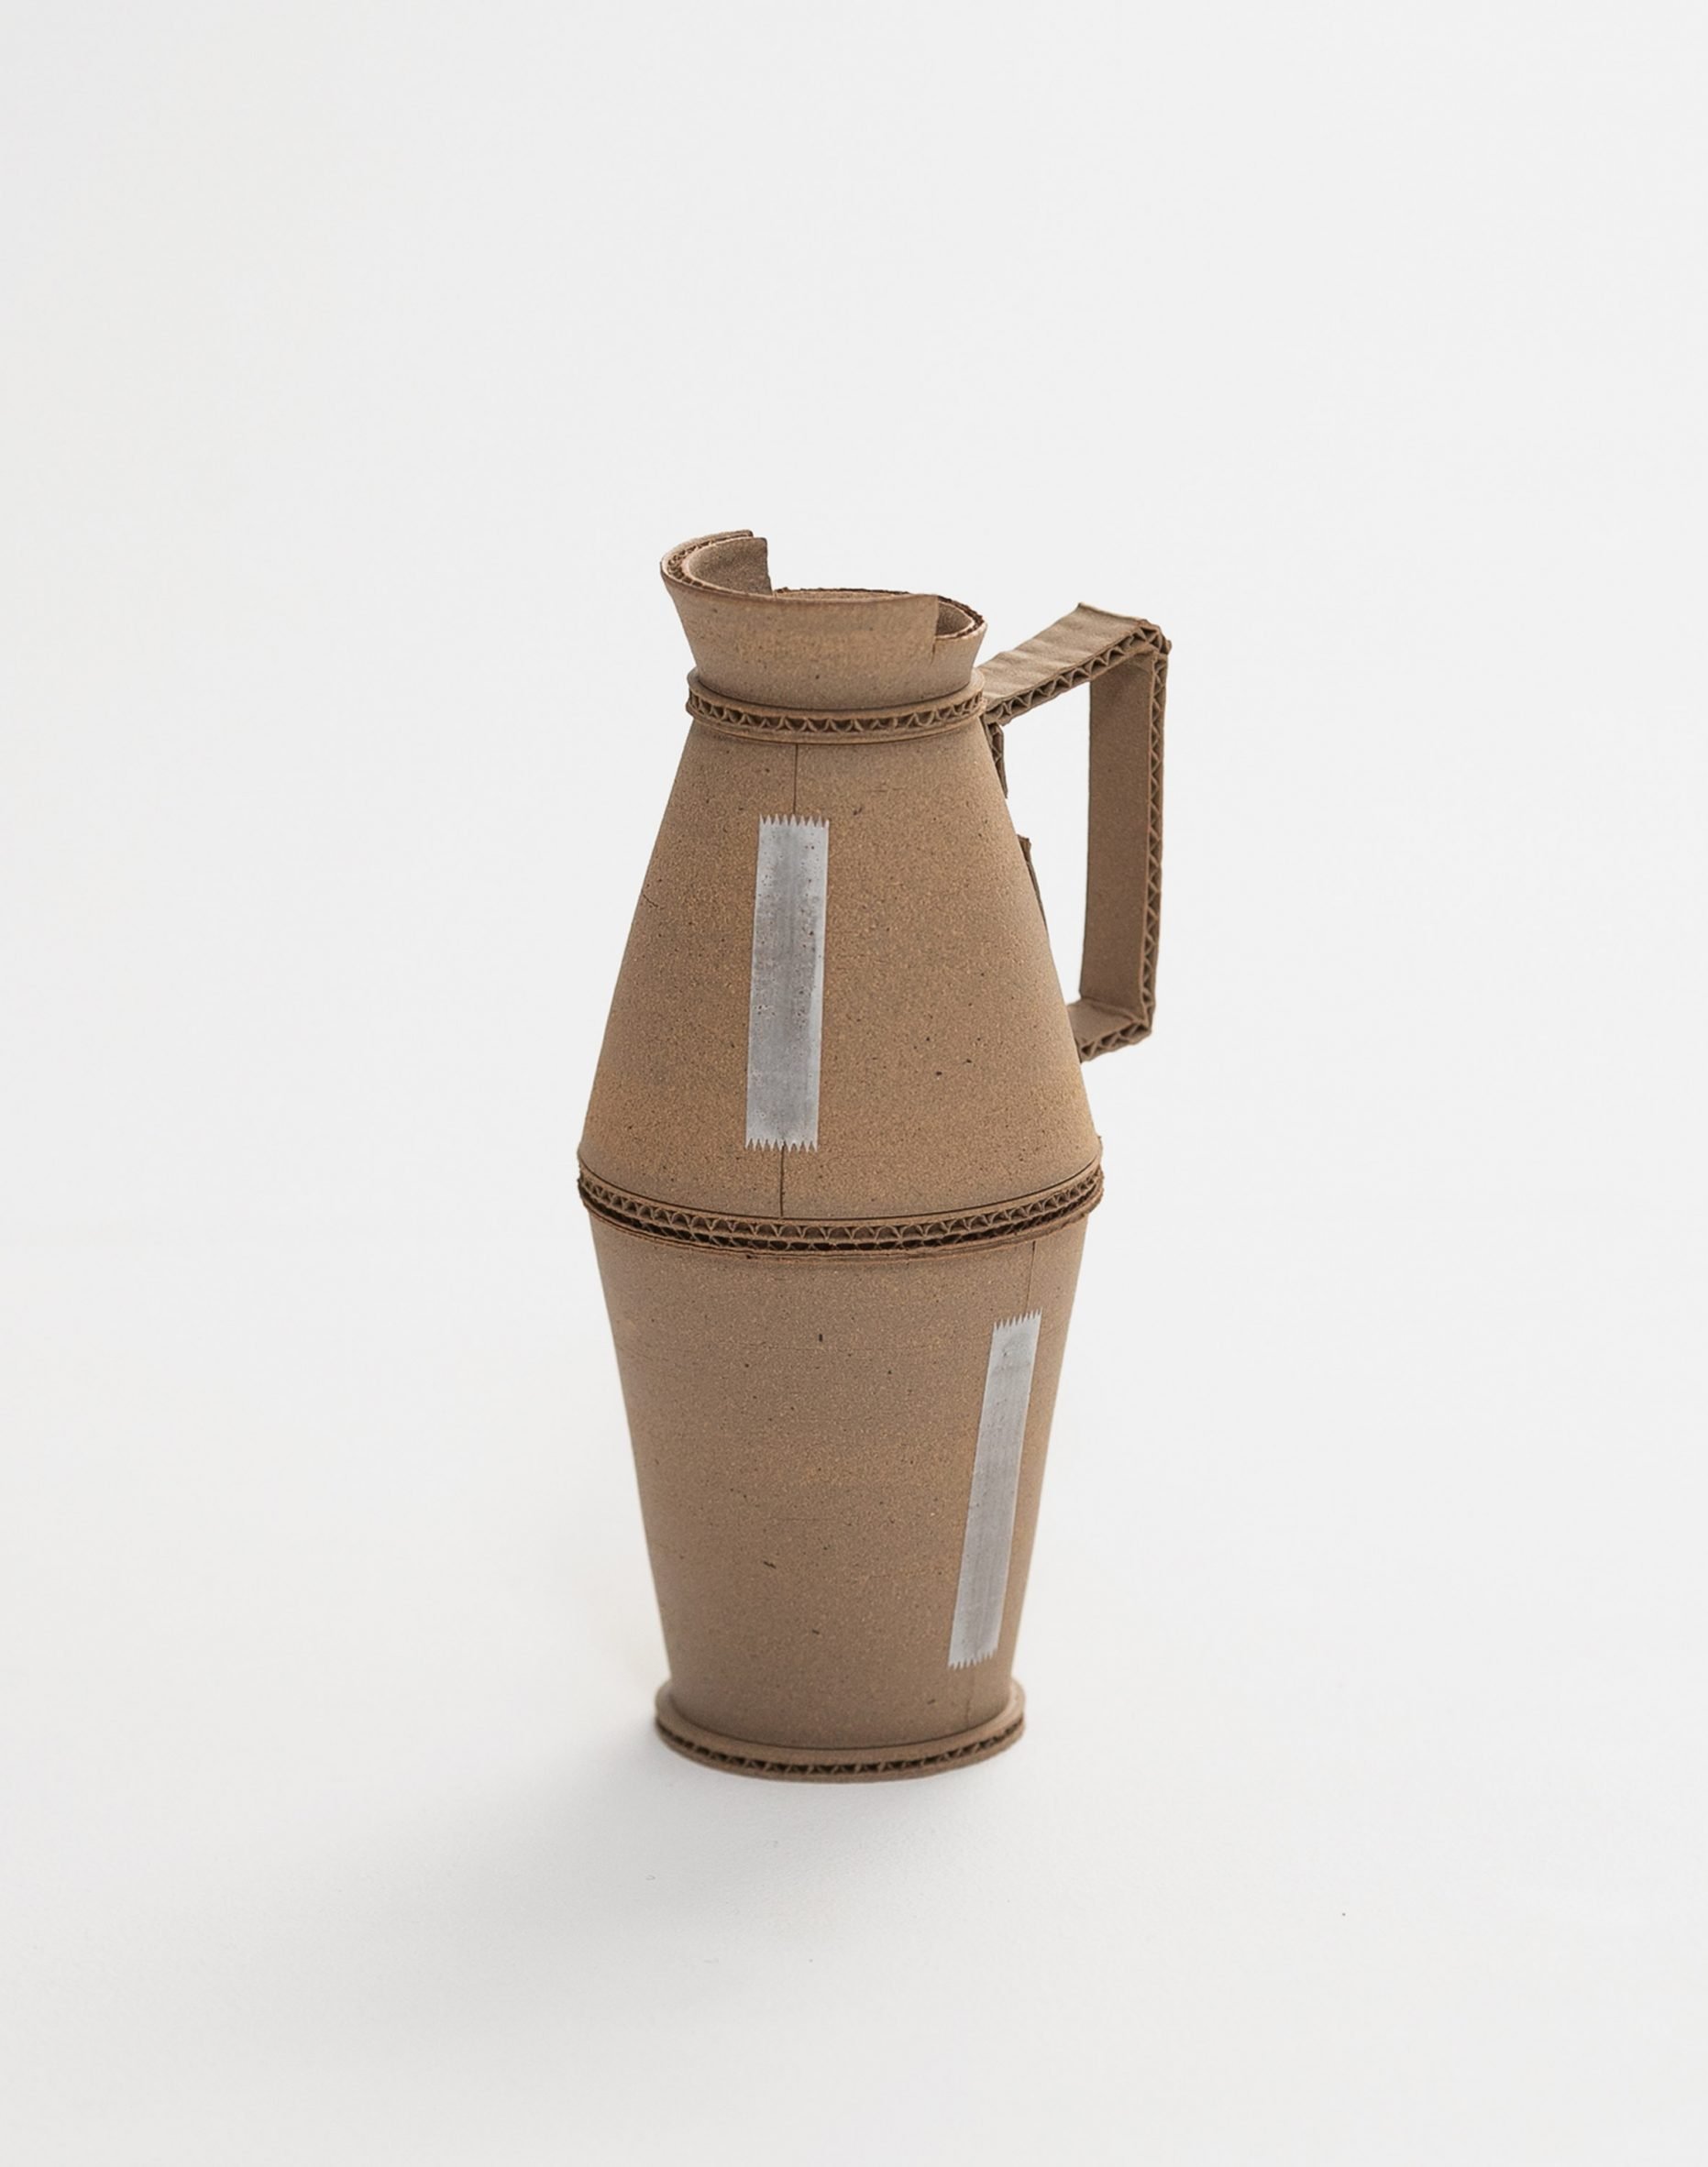 A photograph of a brown jug against a white background.